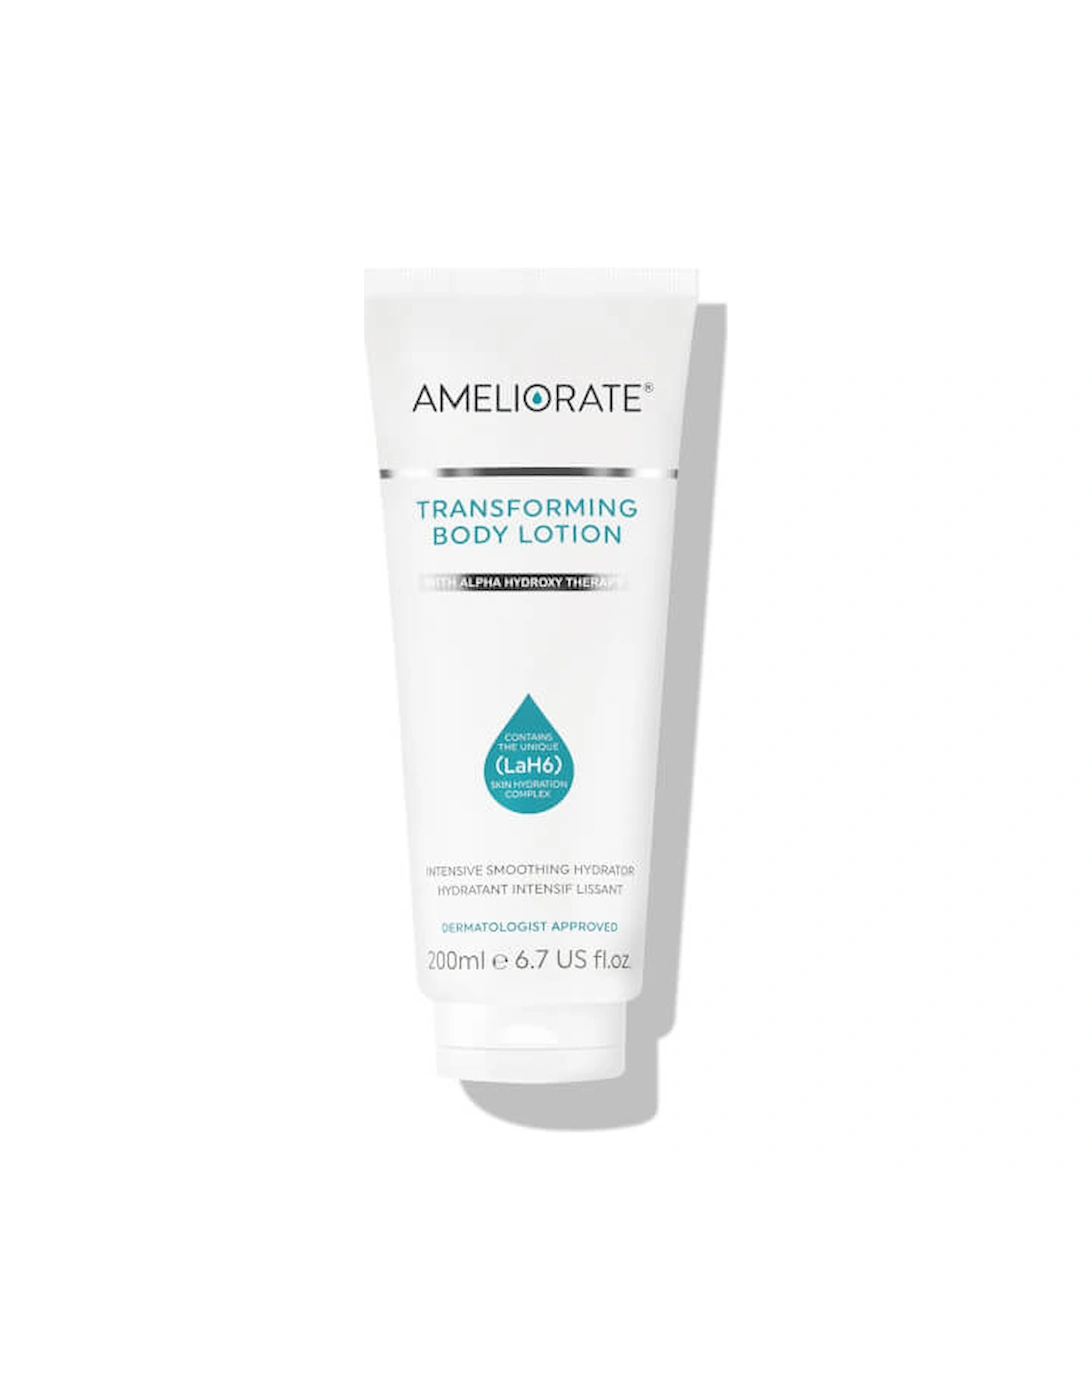 Transforming Body Lotion 200ml - AMELIORATE, 2 of 1